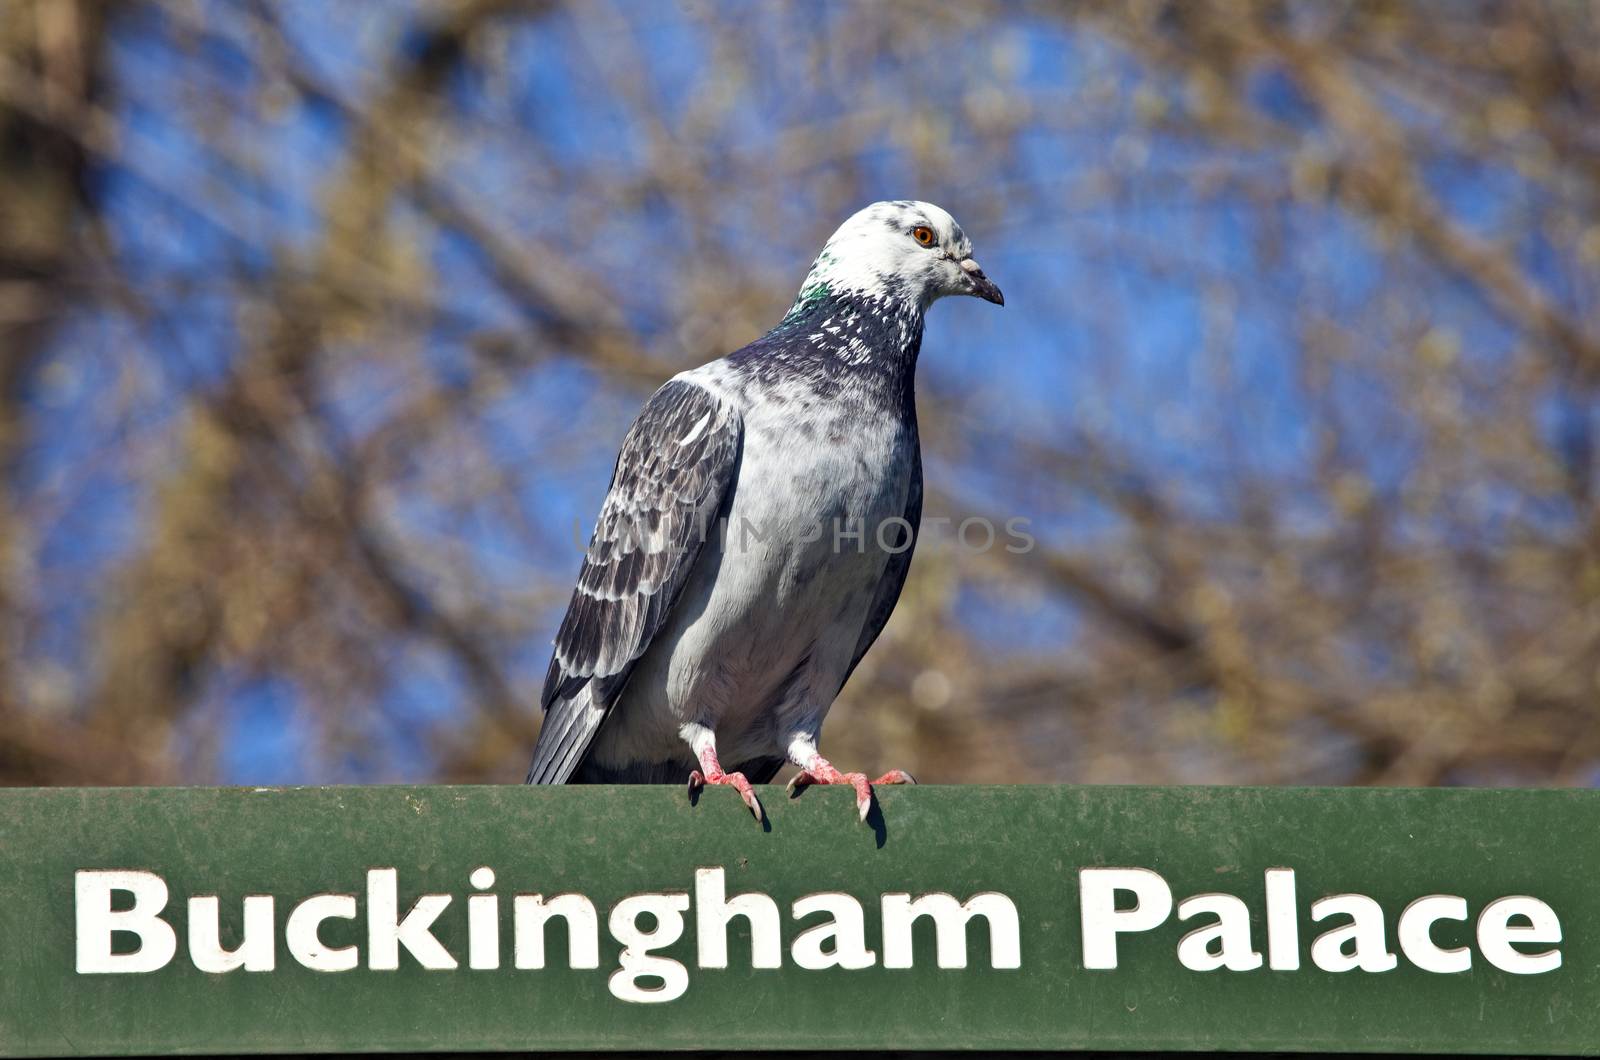 A pigeon on a Buckingham Palace' Signpost in London's St. James's Park.